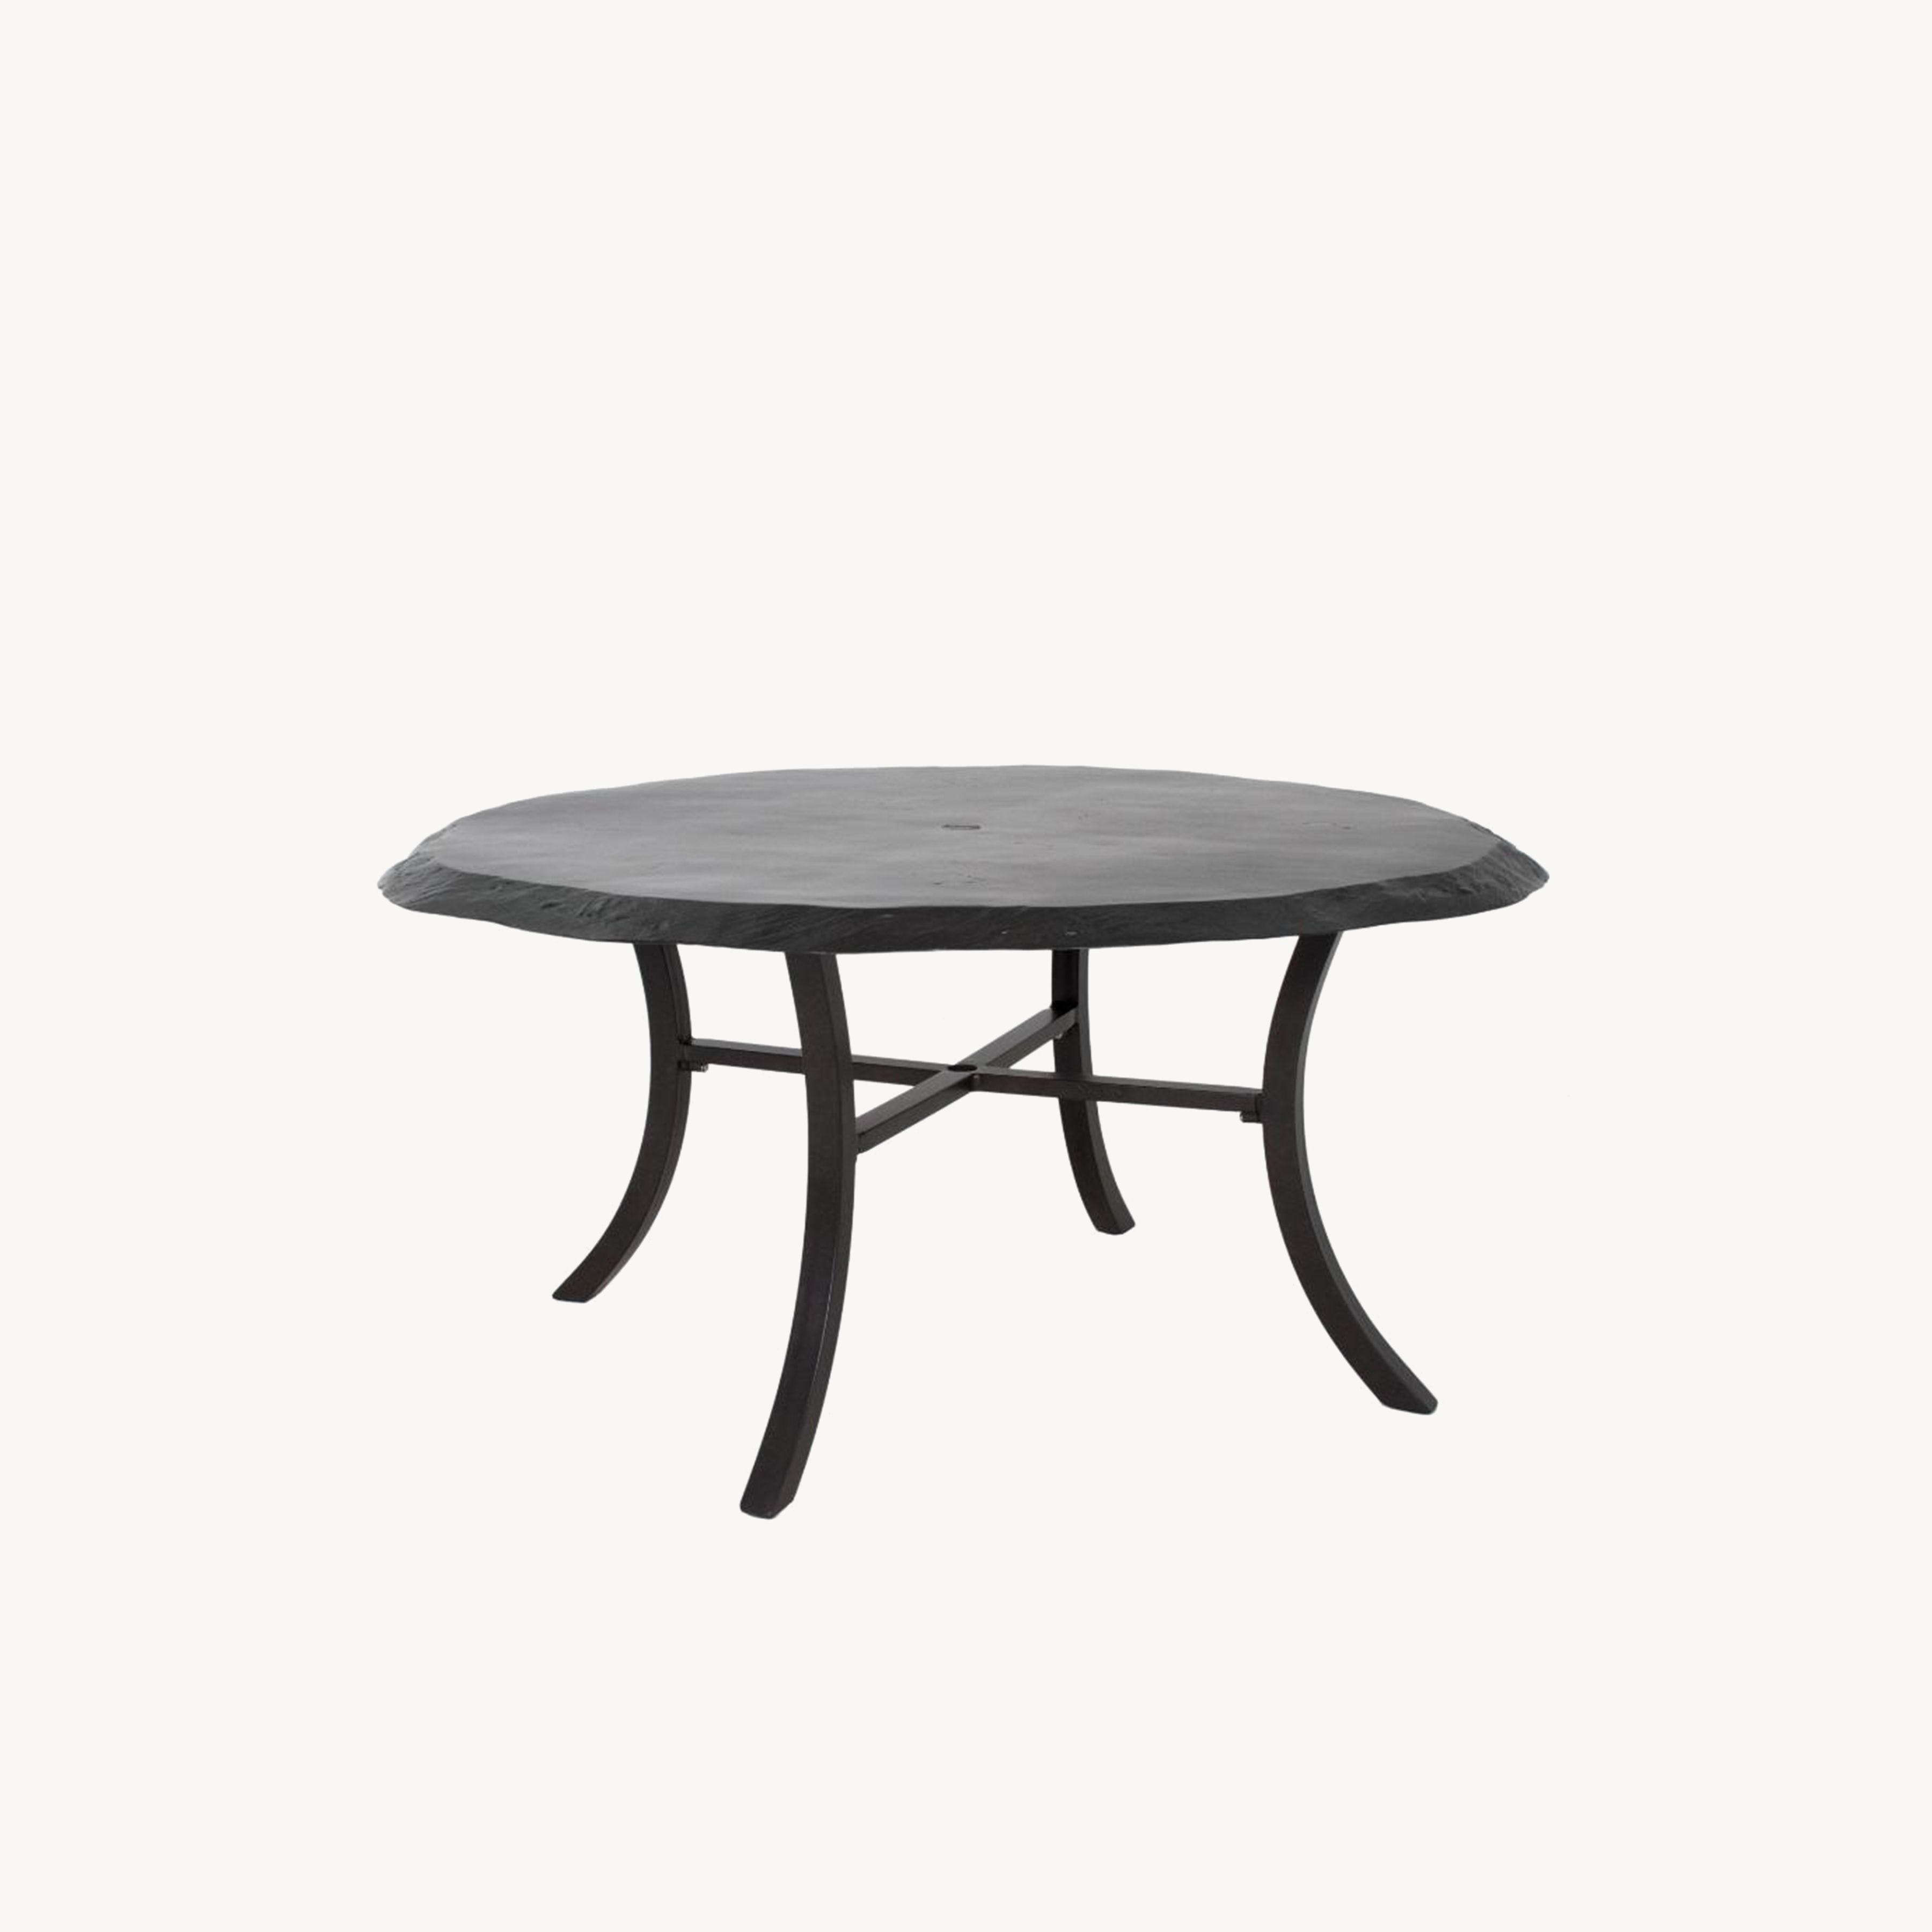 Classical 60" Round Dining Table By Castelle